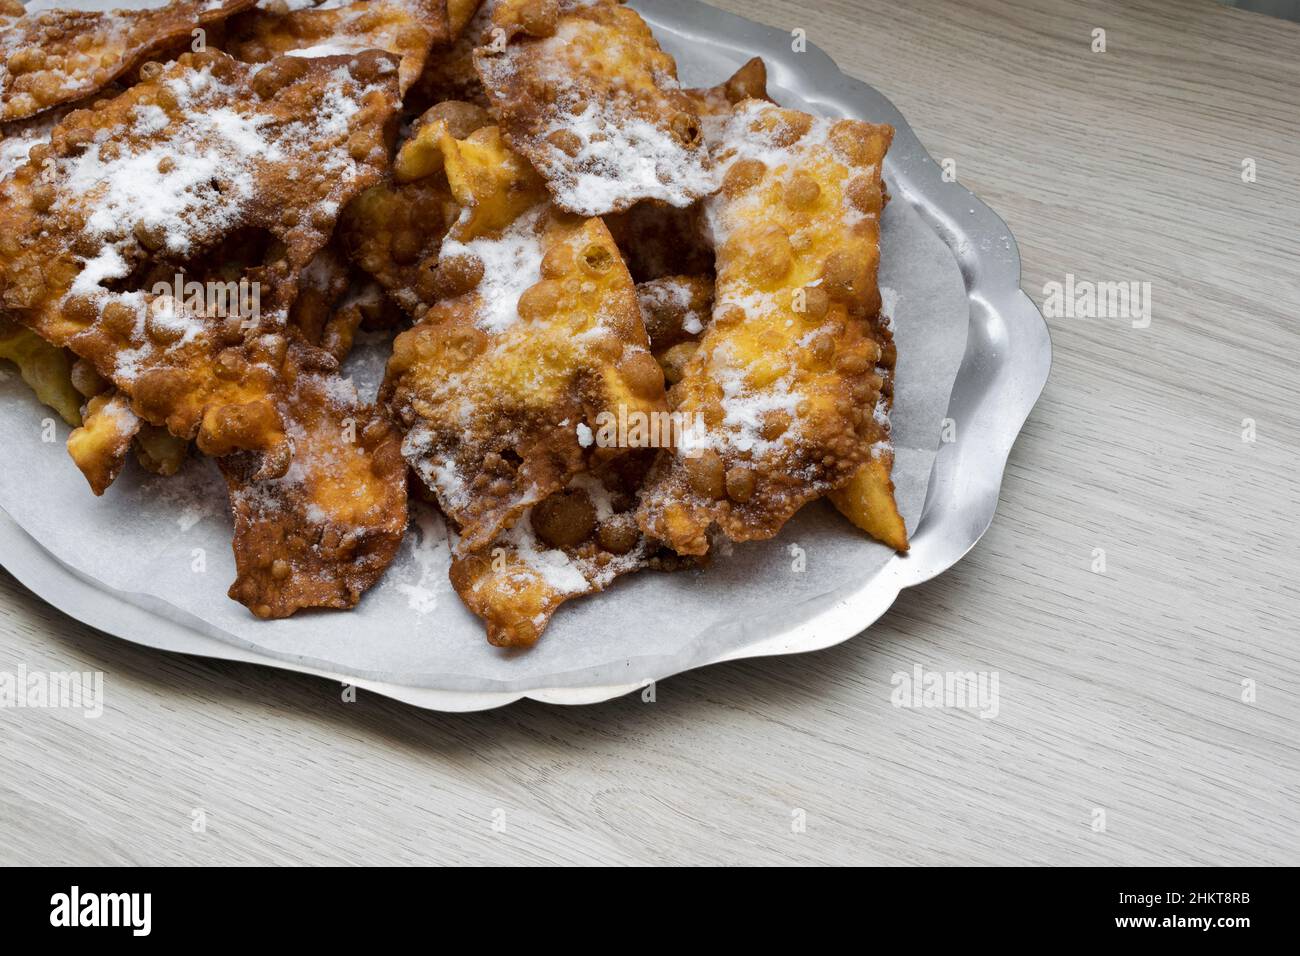 Carnival ears. Typical dessert from Galicia and Leon. Spain Stock Photo